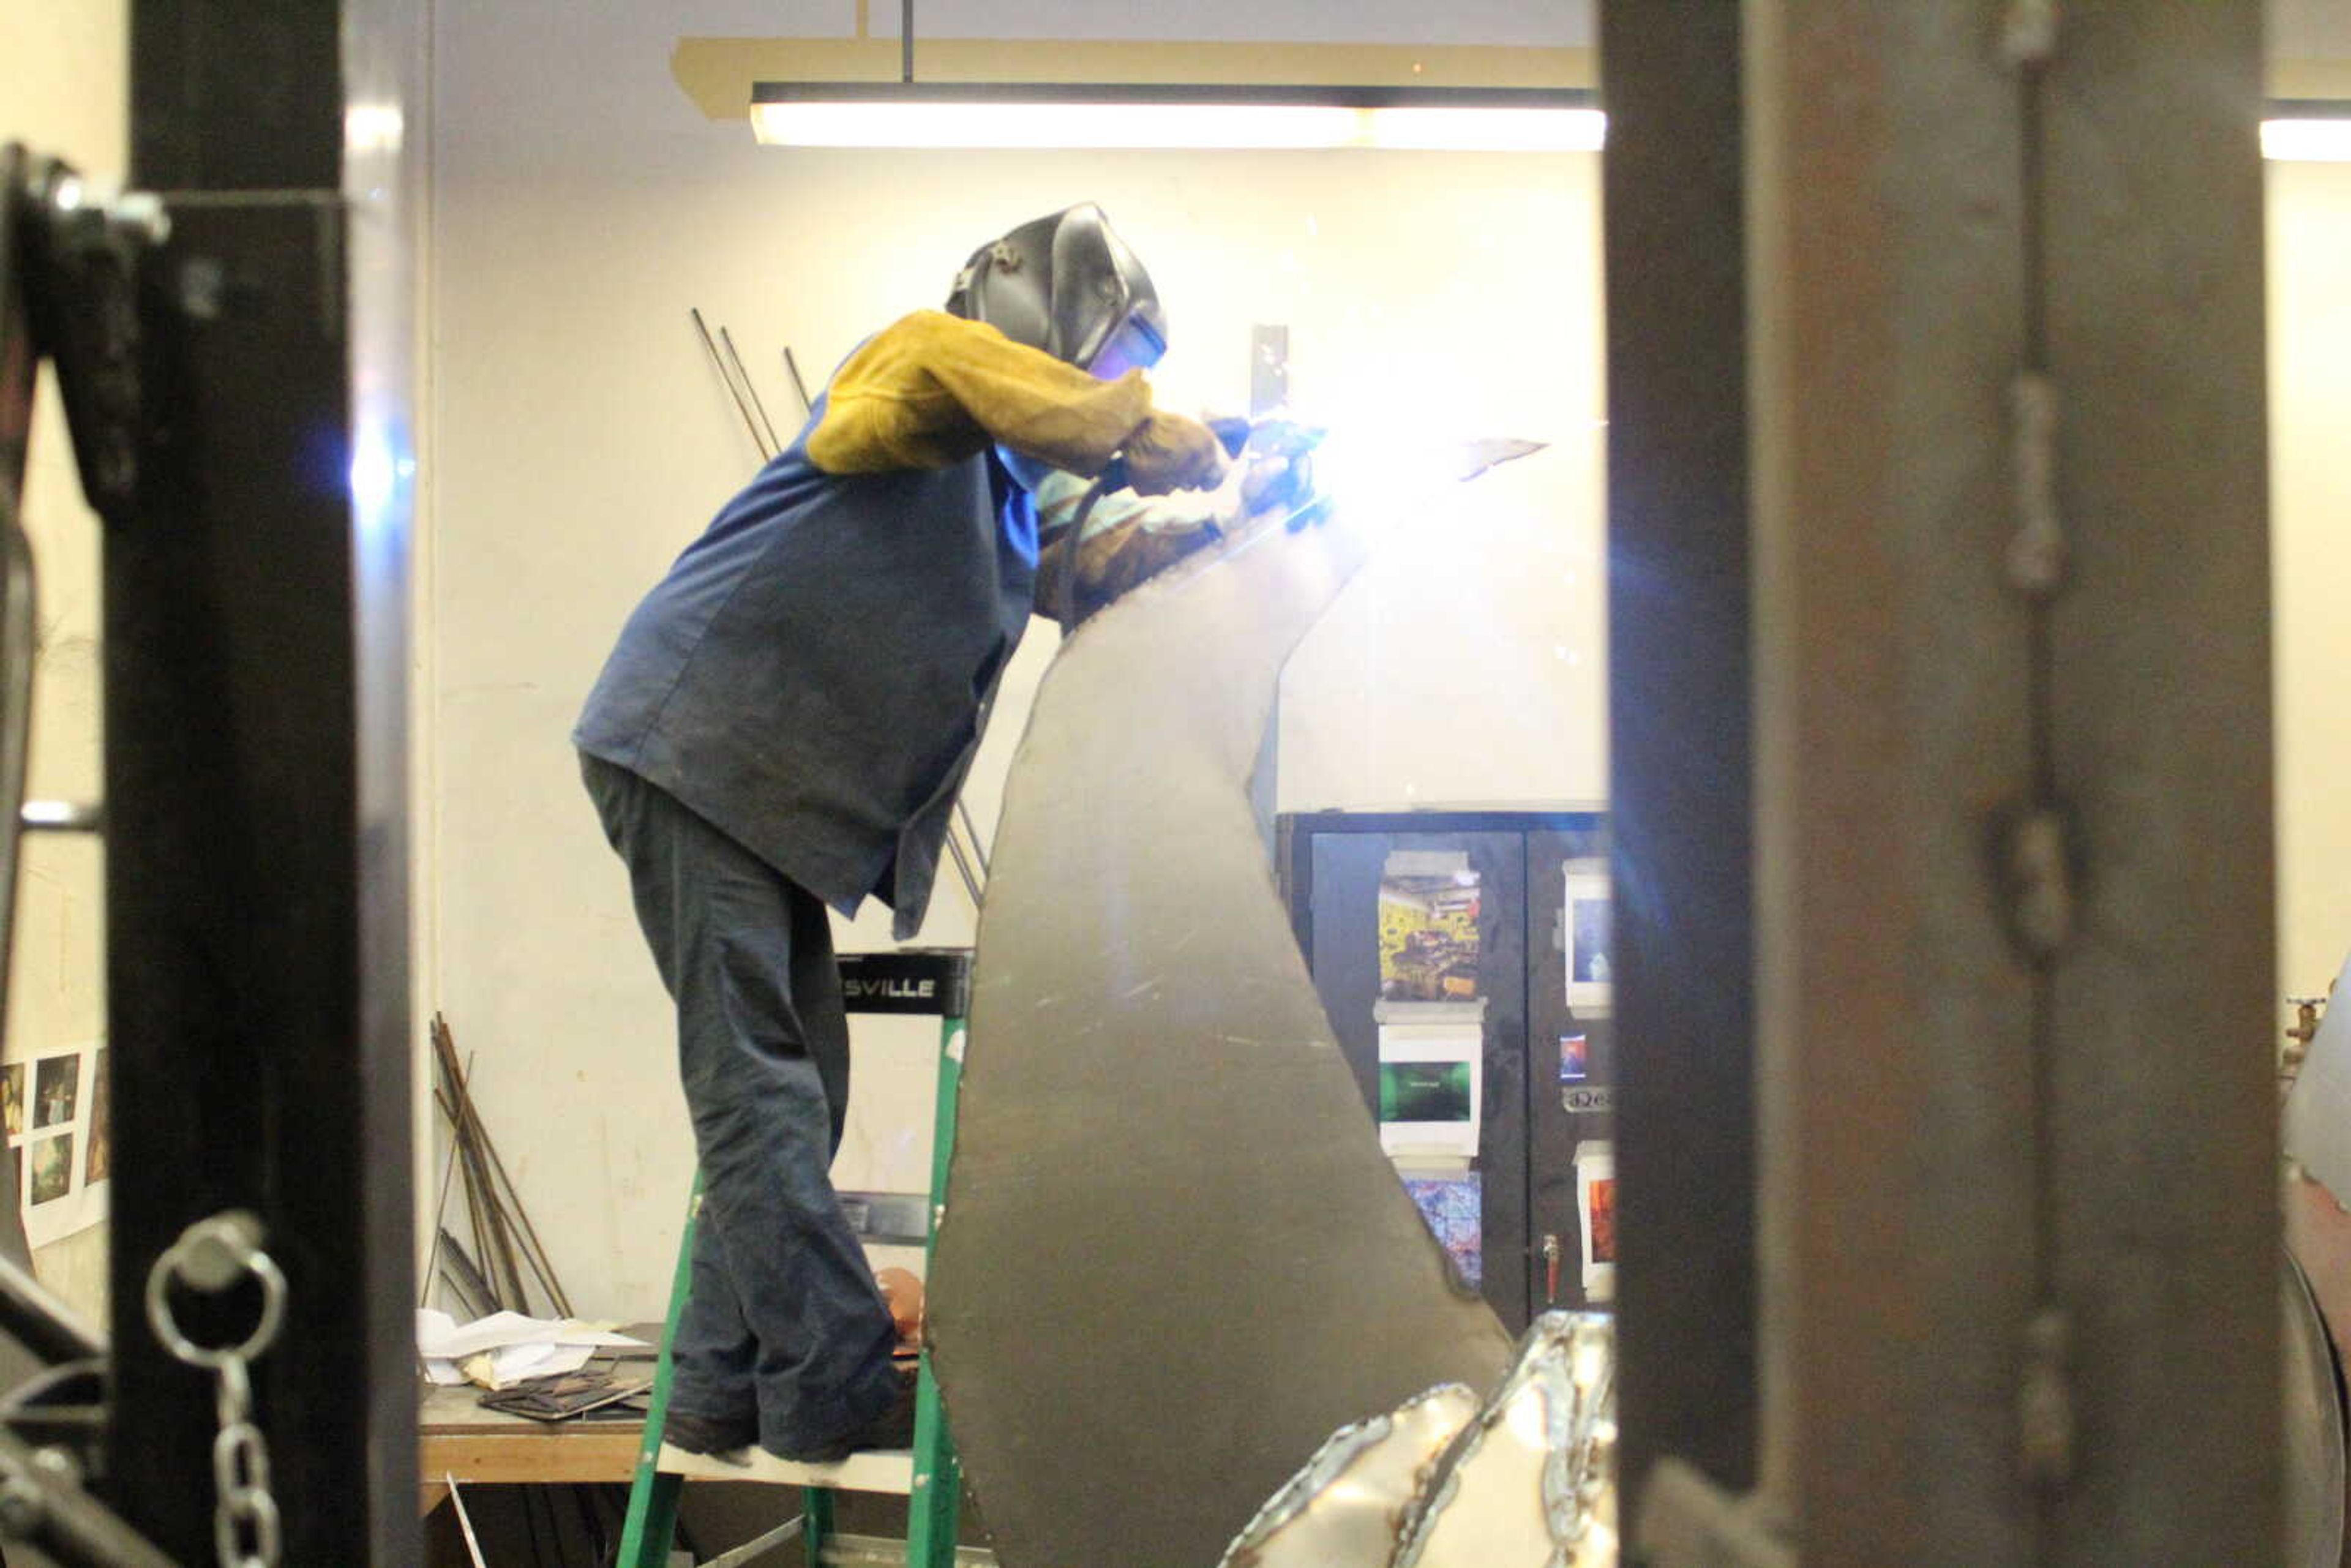 Massive metal flower sculpture by Southeast student to be featured on Broadway and Sprigg St.